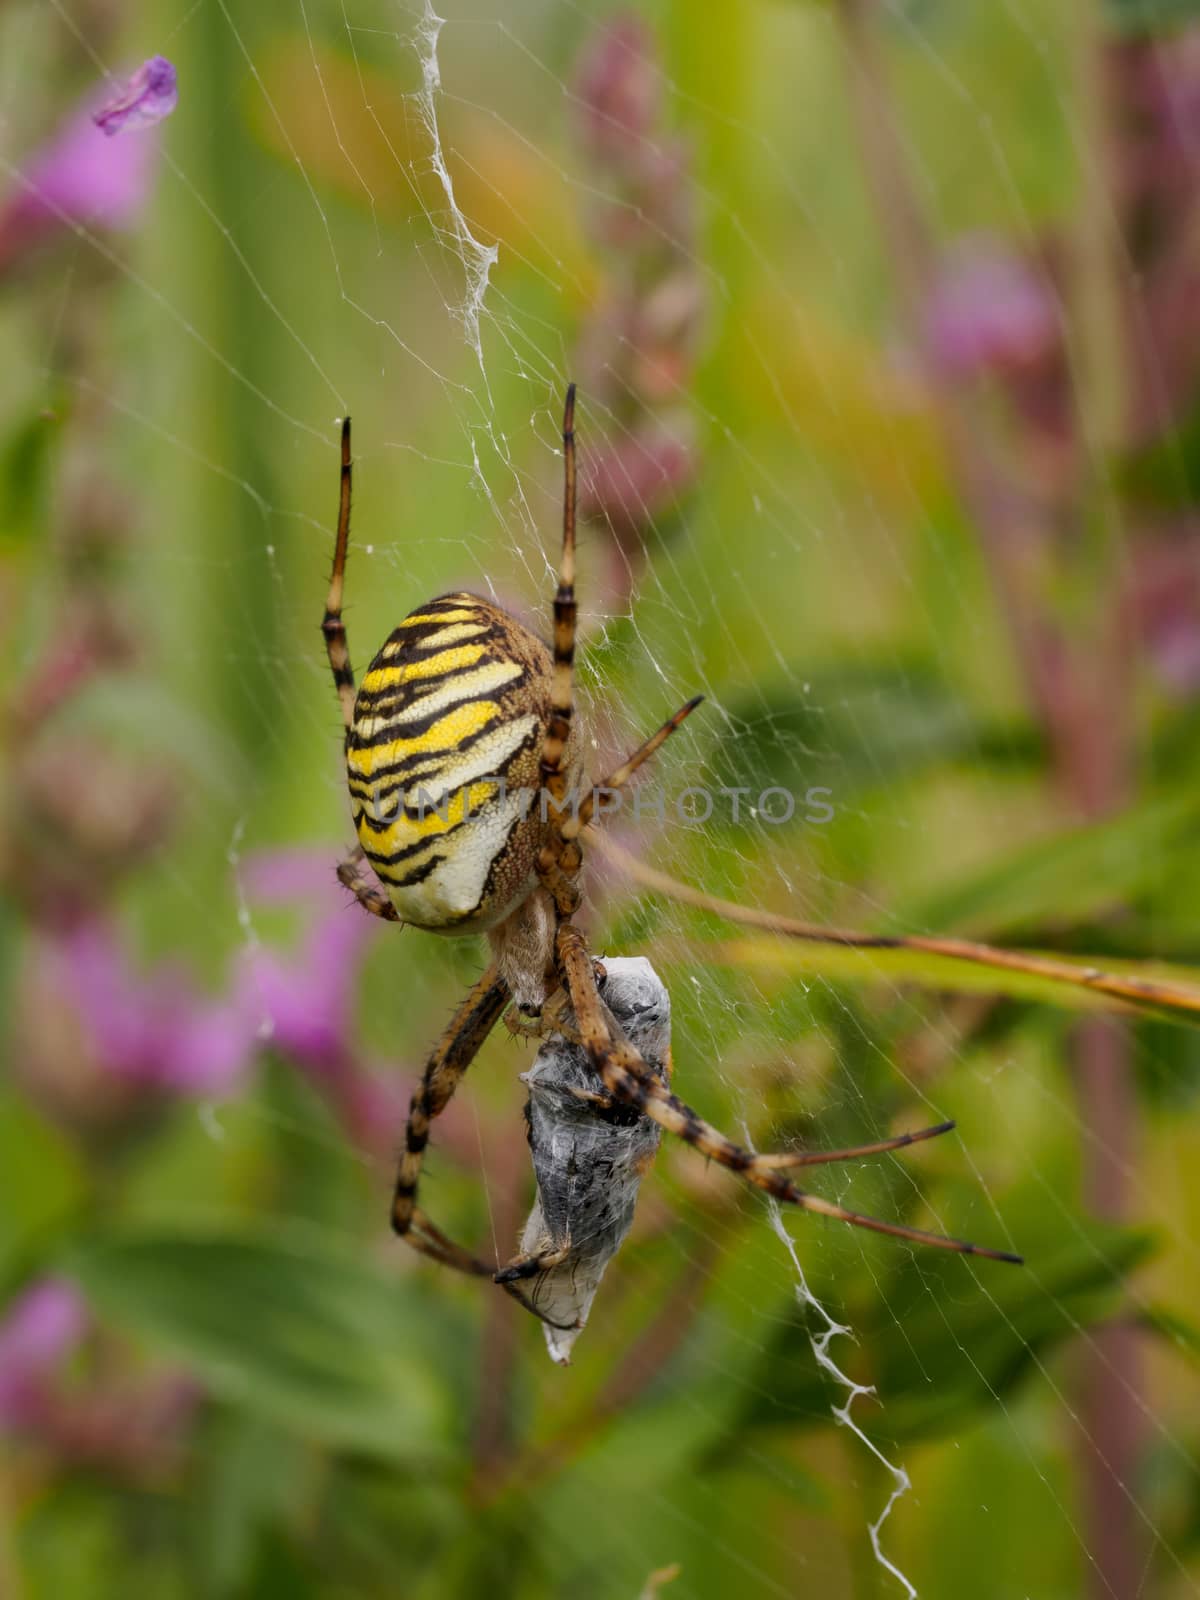 Macro shot of a large striped spider with captured prey